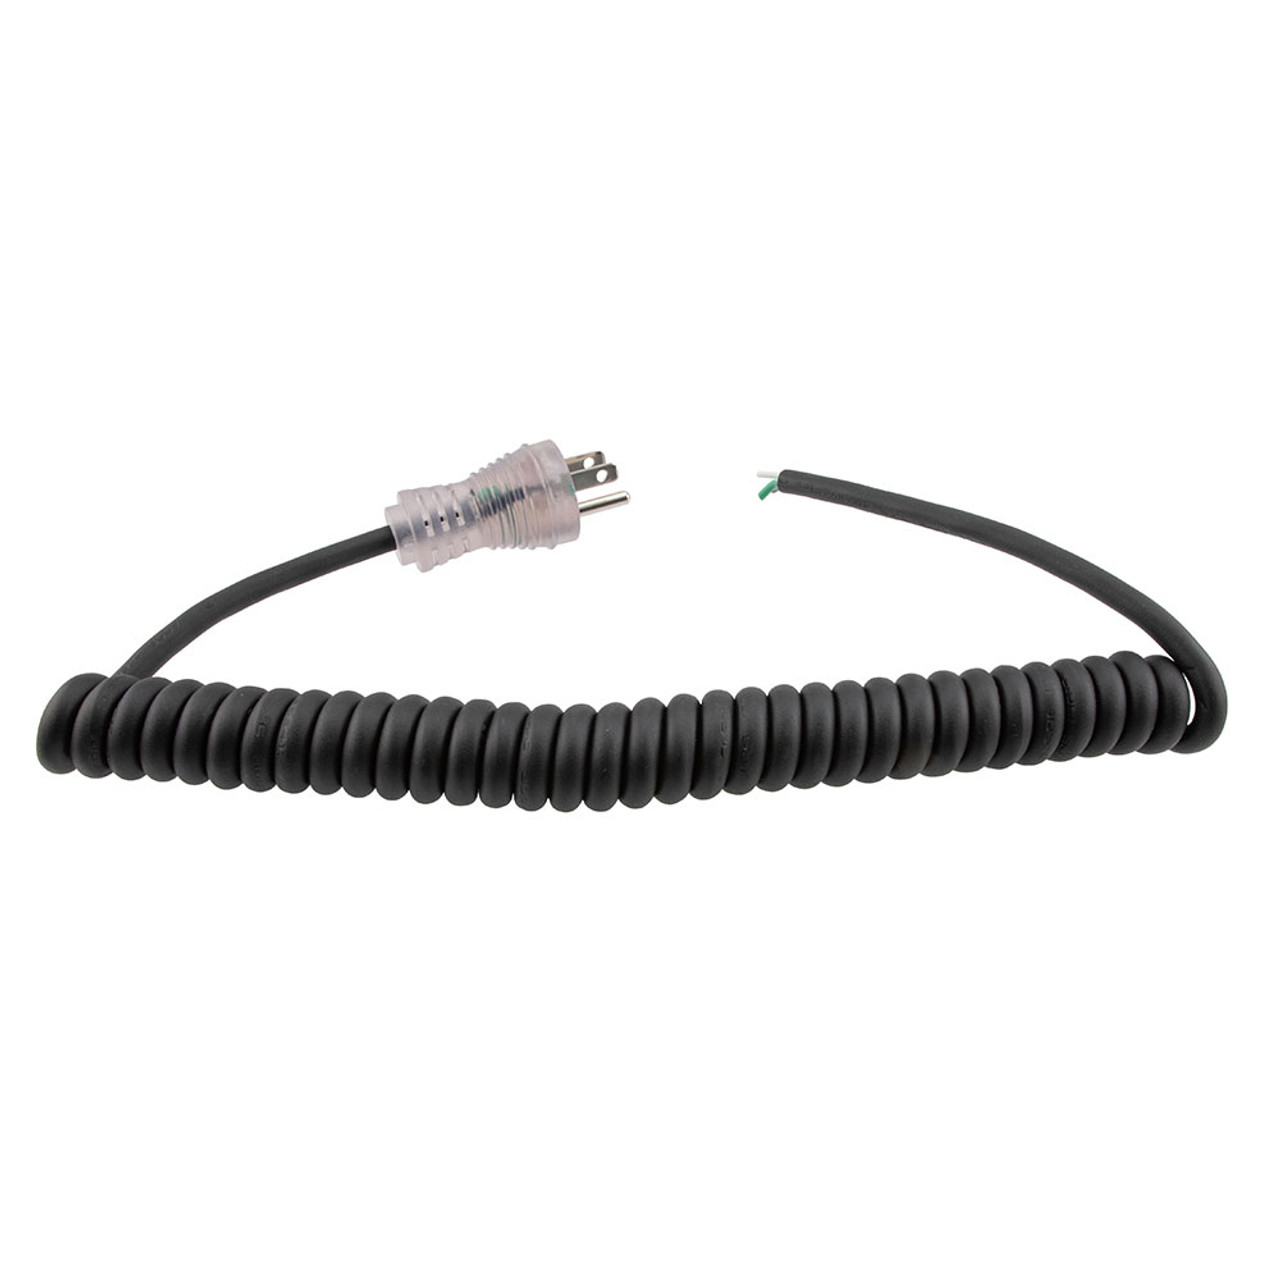 Hospital Grade NEMA 5-15 With LED to Open Coiled Power Cord 18 AWG TPE Jacket, 1 Foot Compressed Length